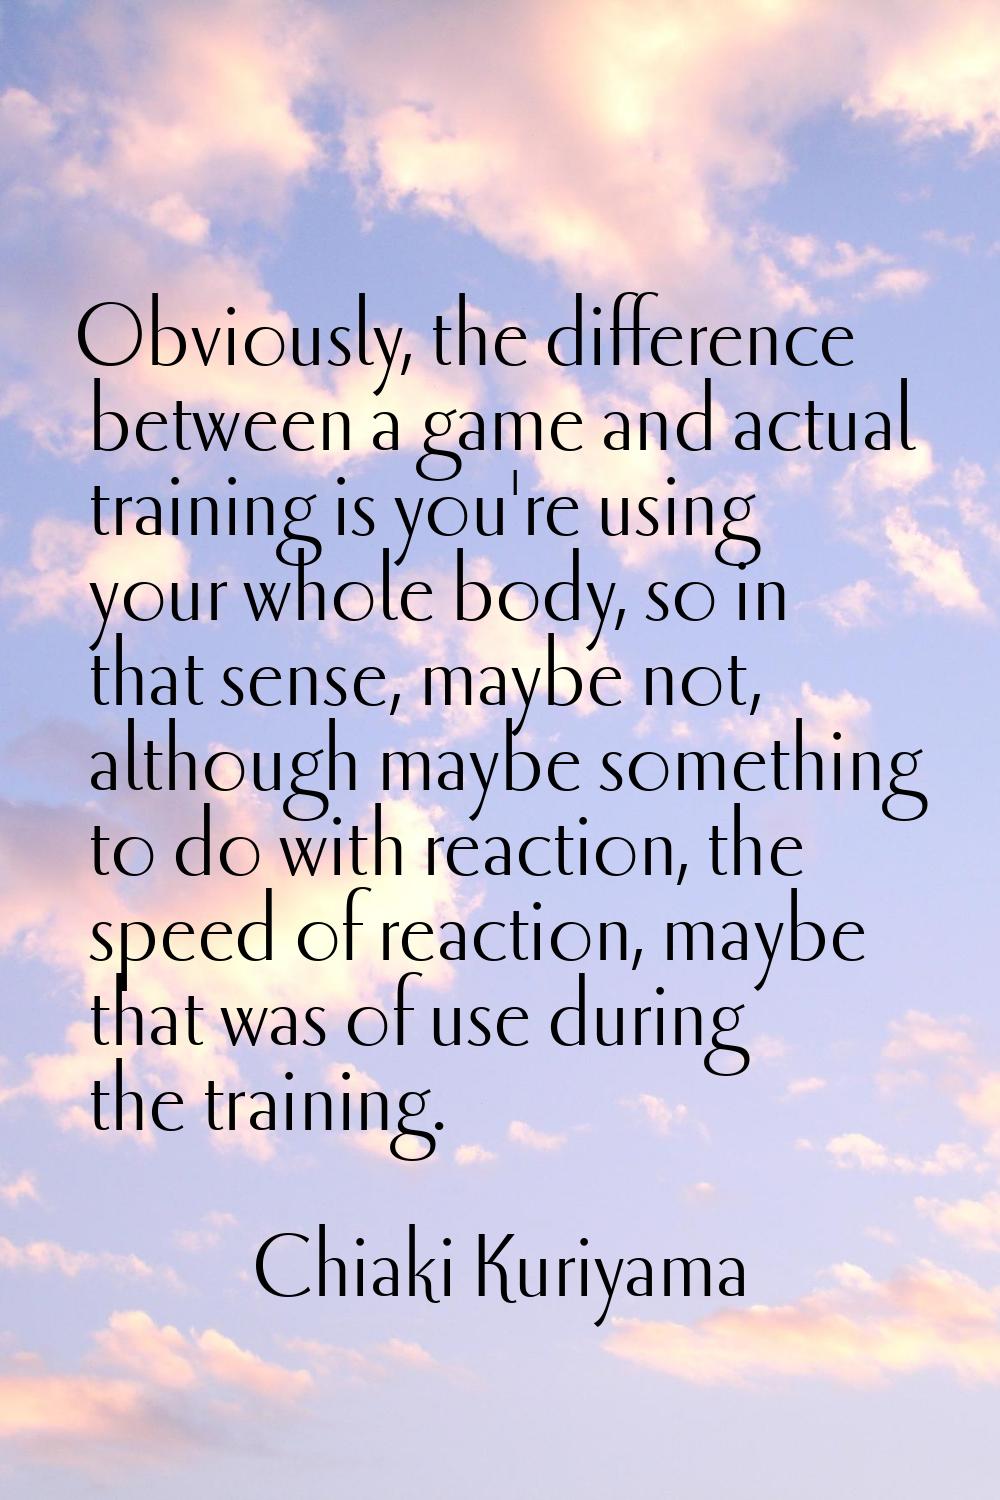 Obviously, the difference between a game and actual training is you're using your whole body, so in